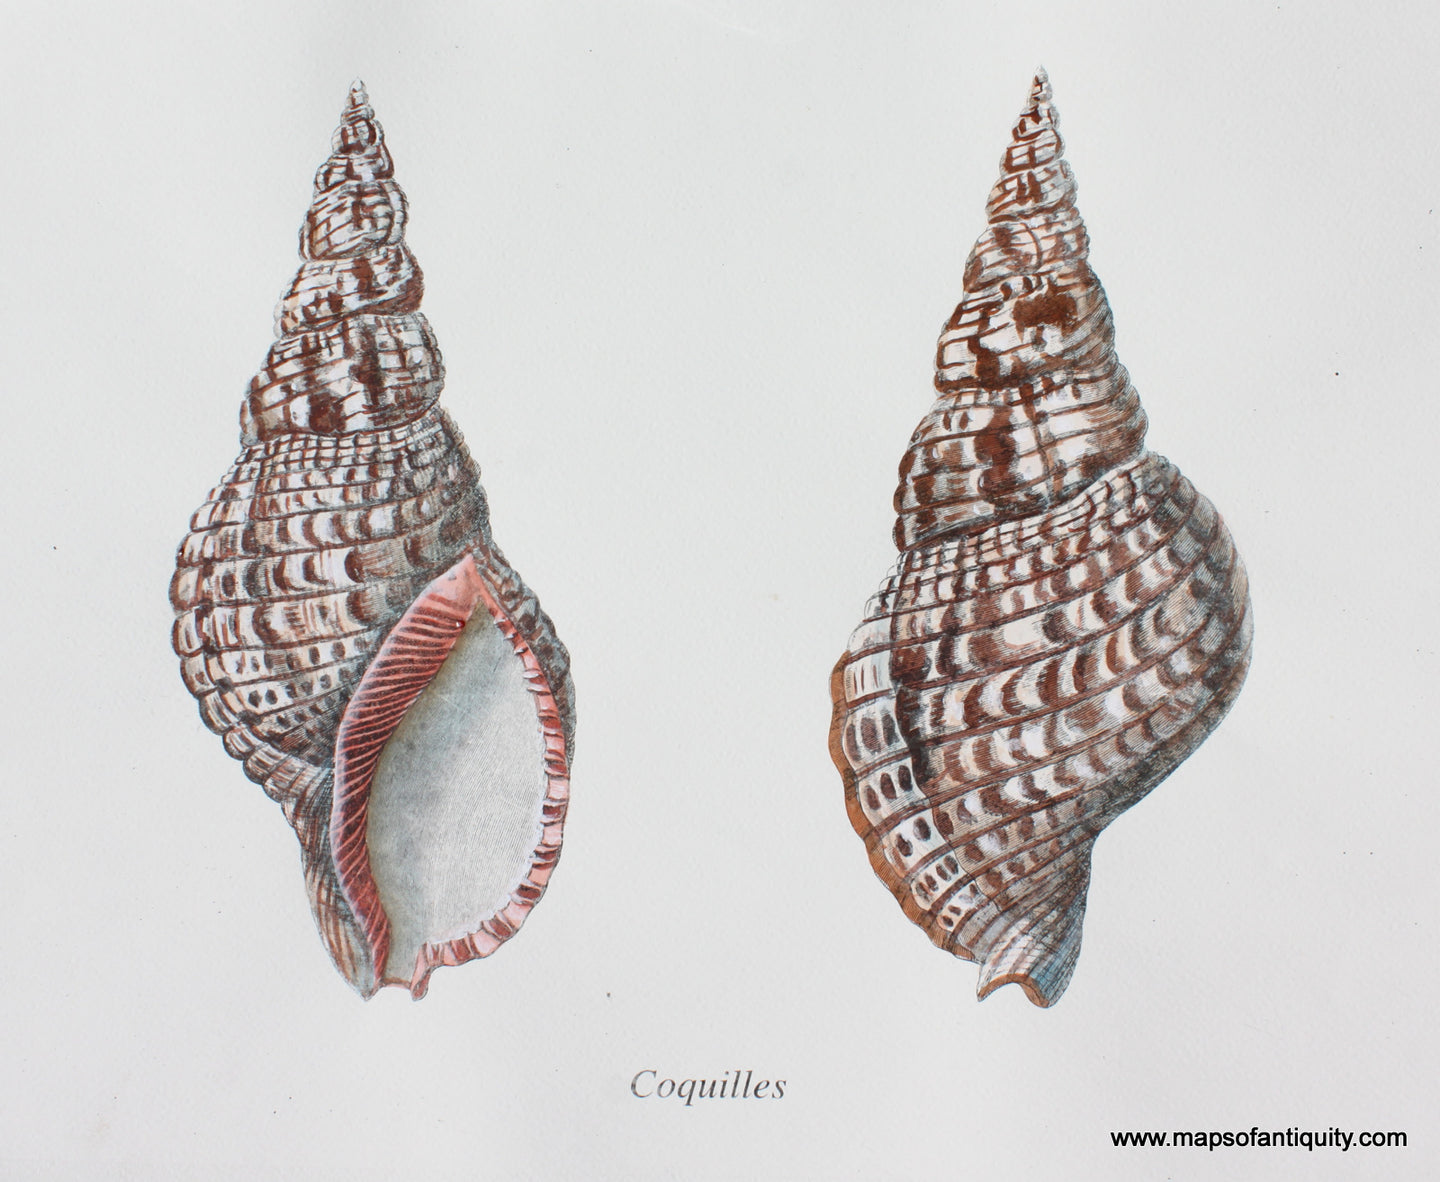 Digitally-Engraved-Specialty-Reproduction-Coquilles-(Reproduction)-Reproductions---Reproduction-Maps-Of-Antiquity